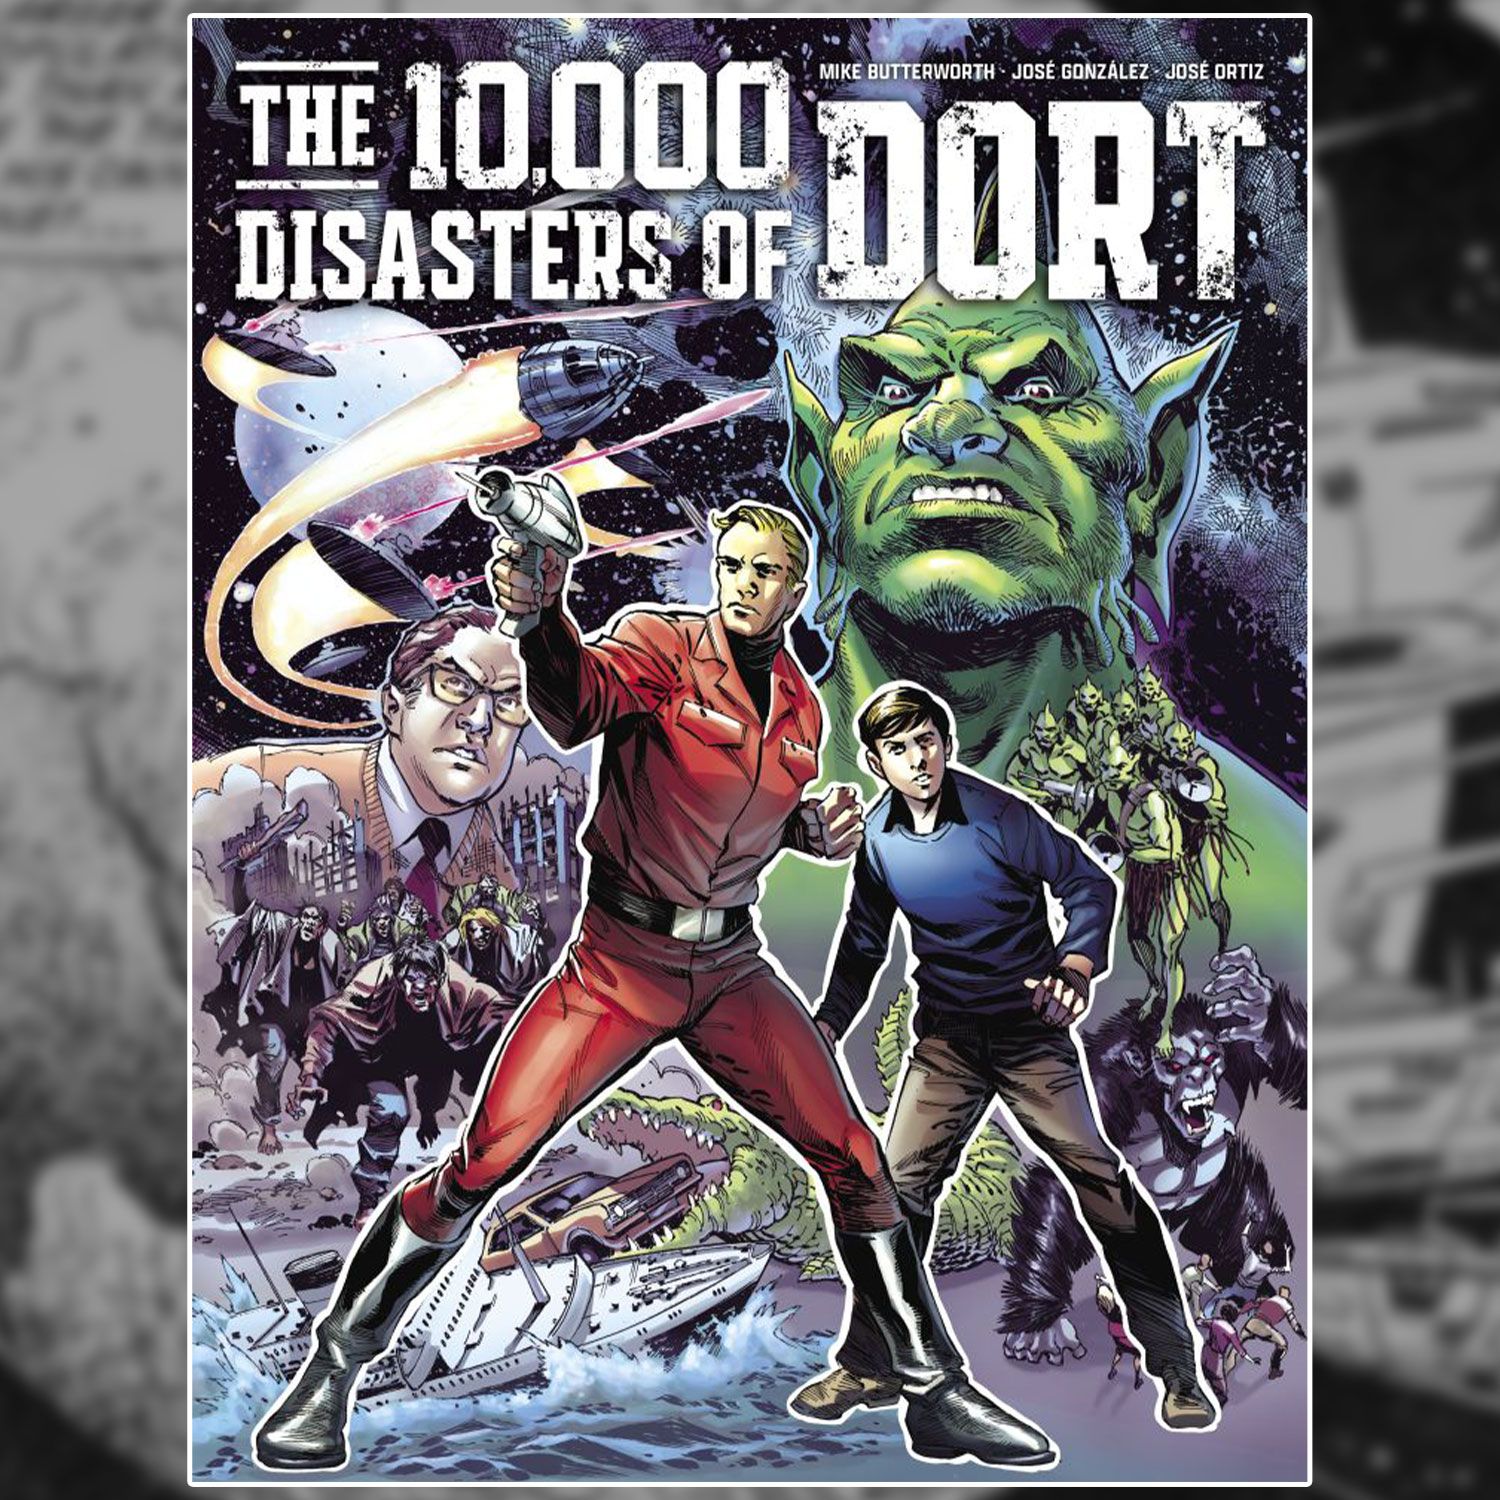 The 10,000 Disasters of Dort – out now!